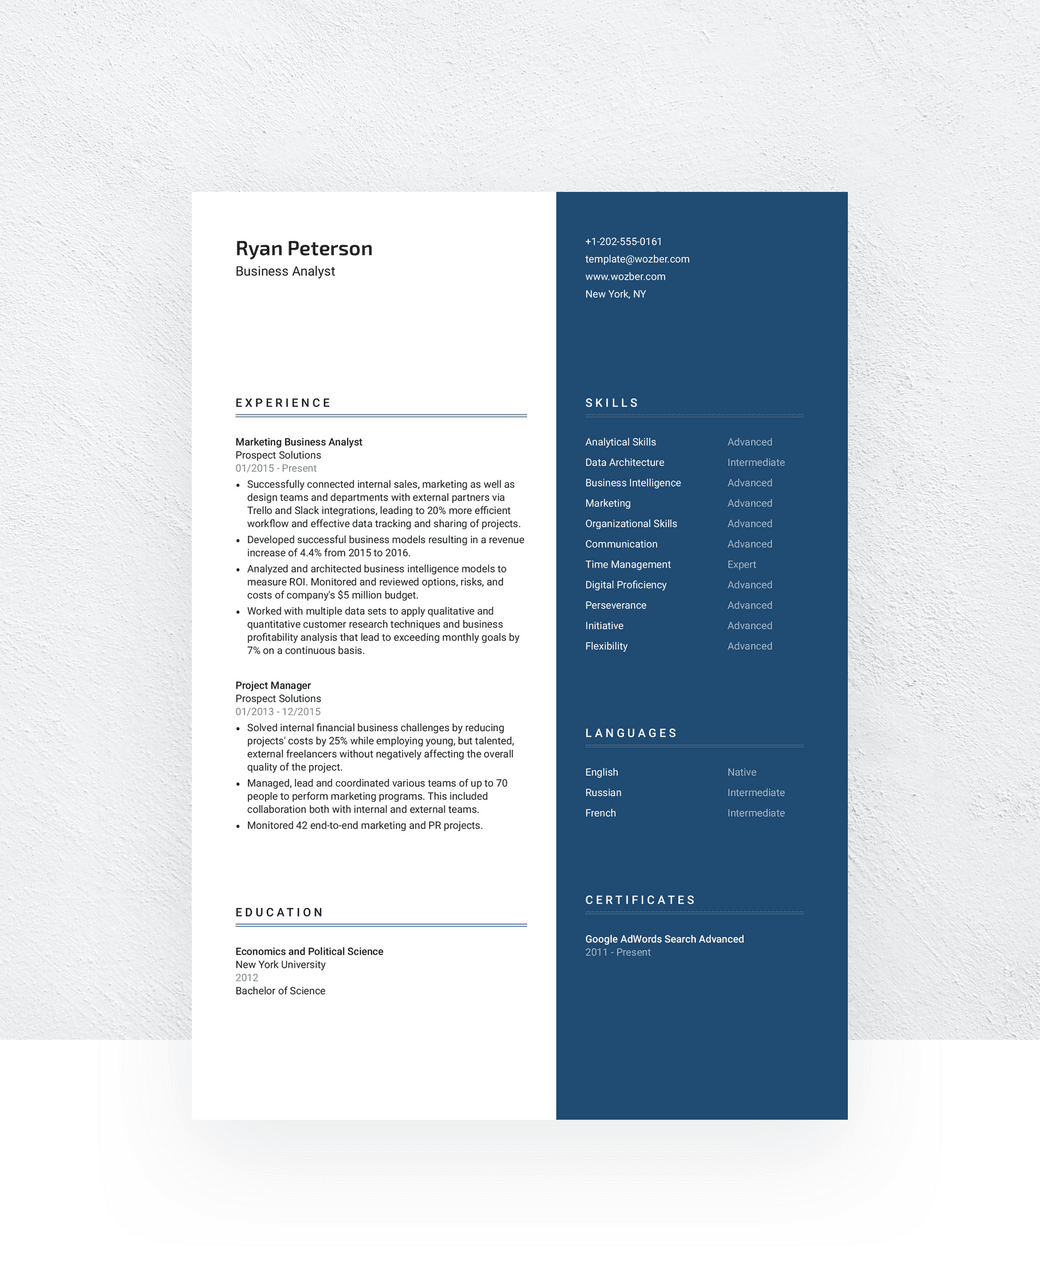 An old-fashioned yet still modern CV template to choose.